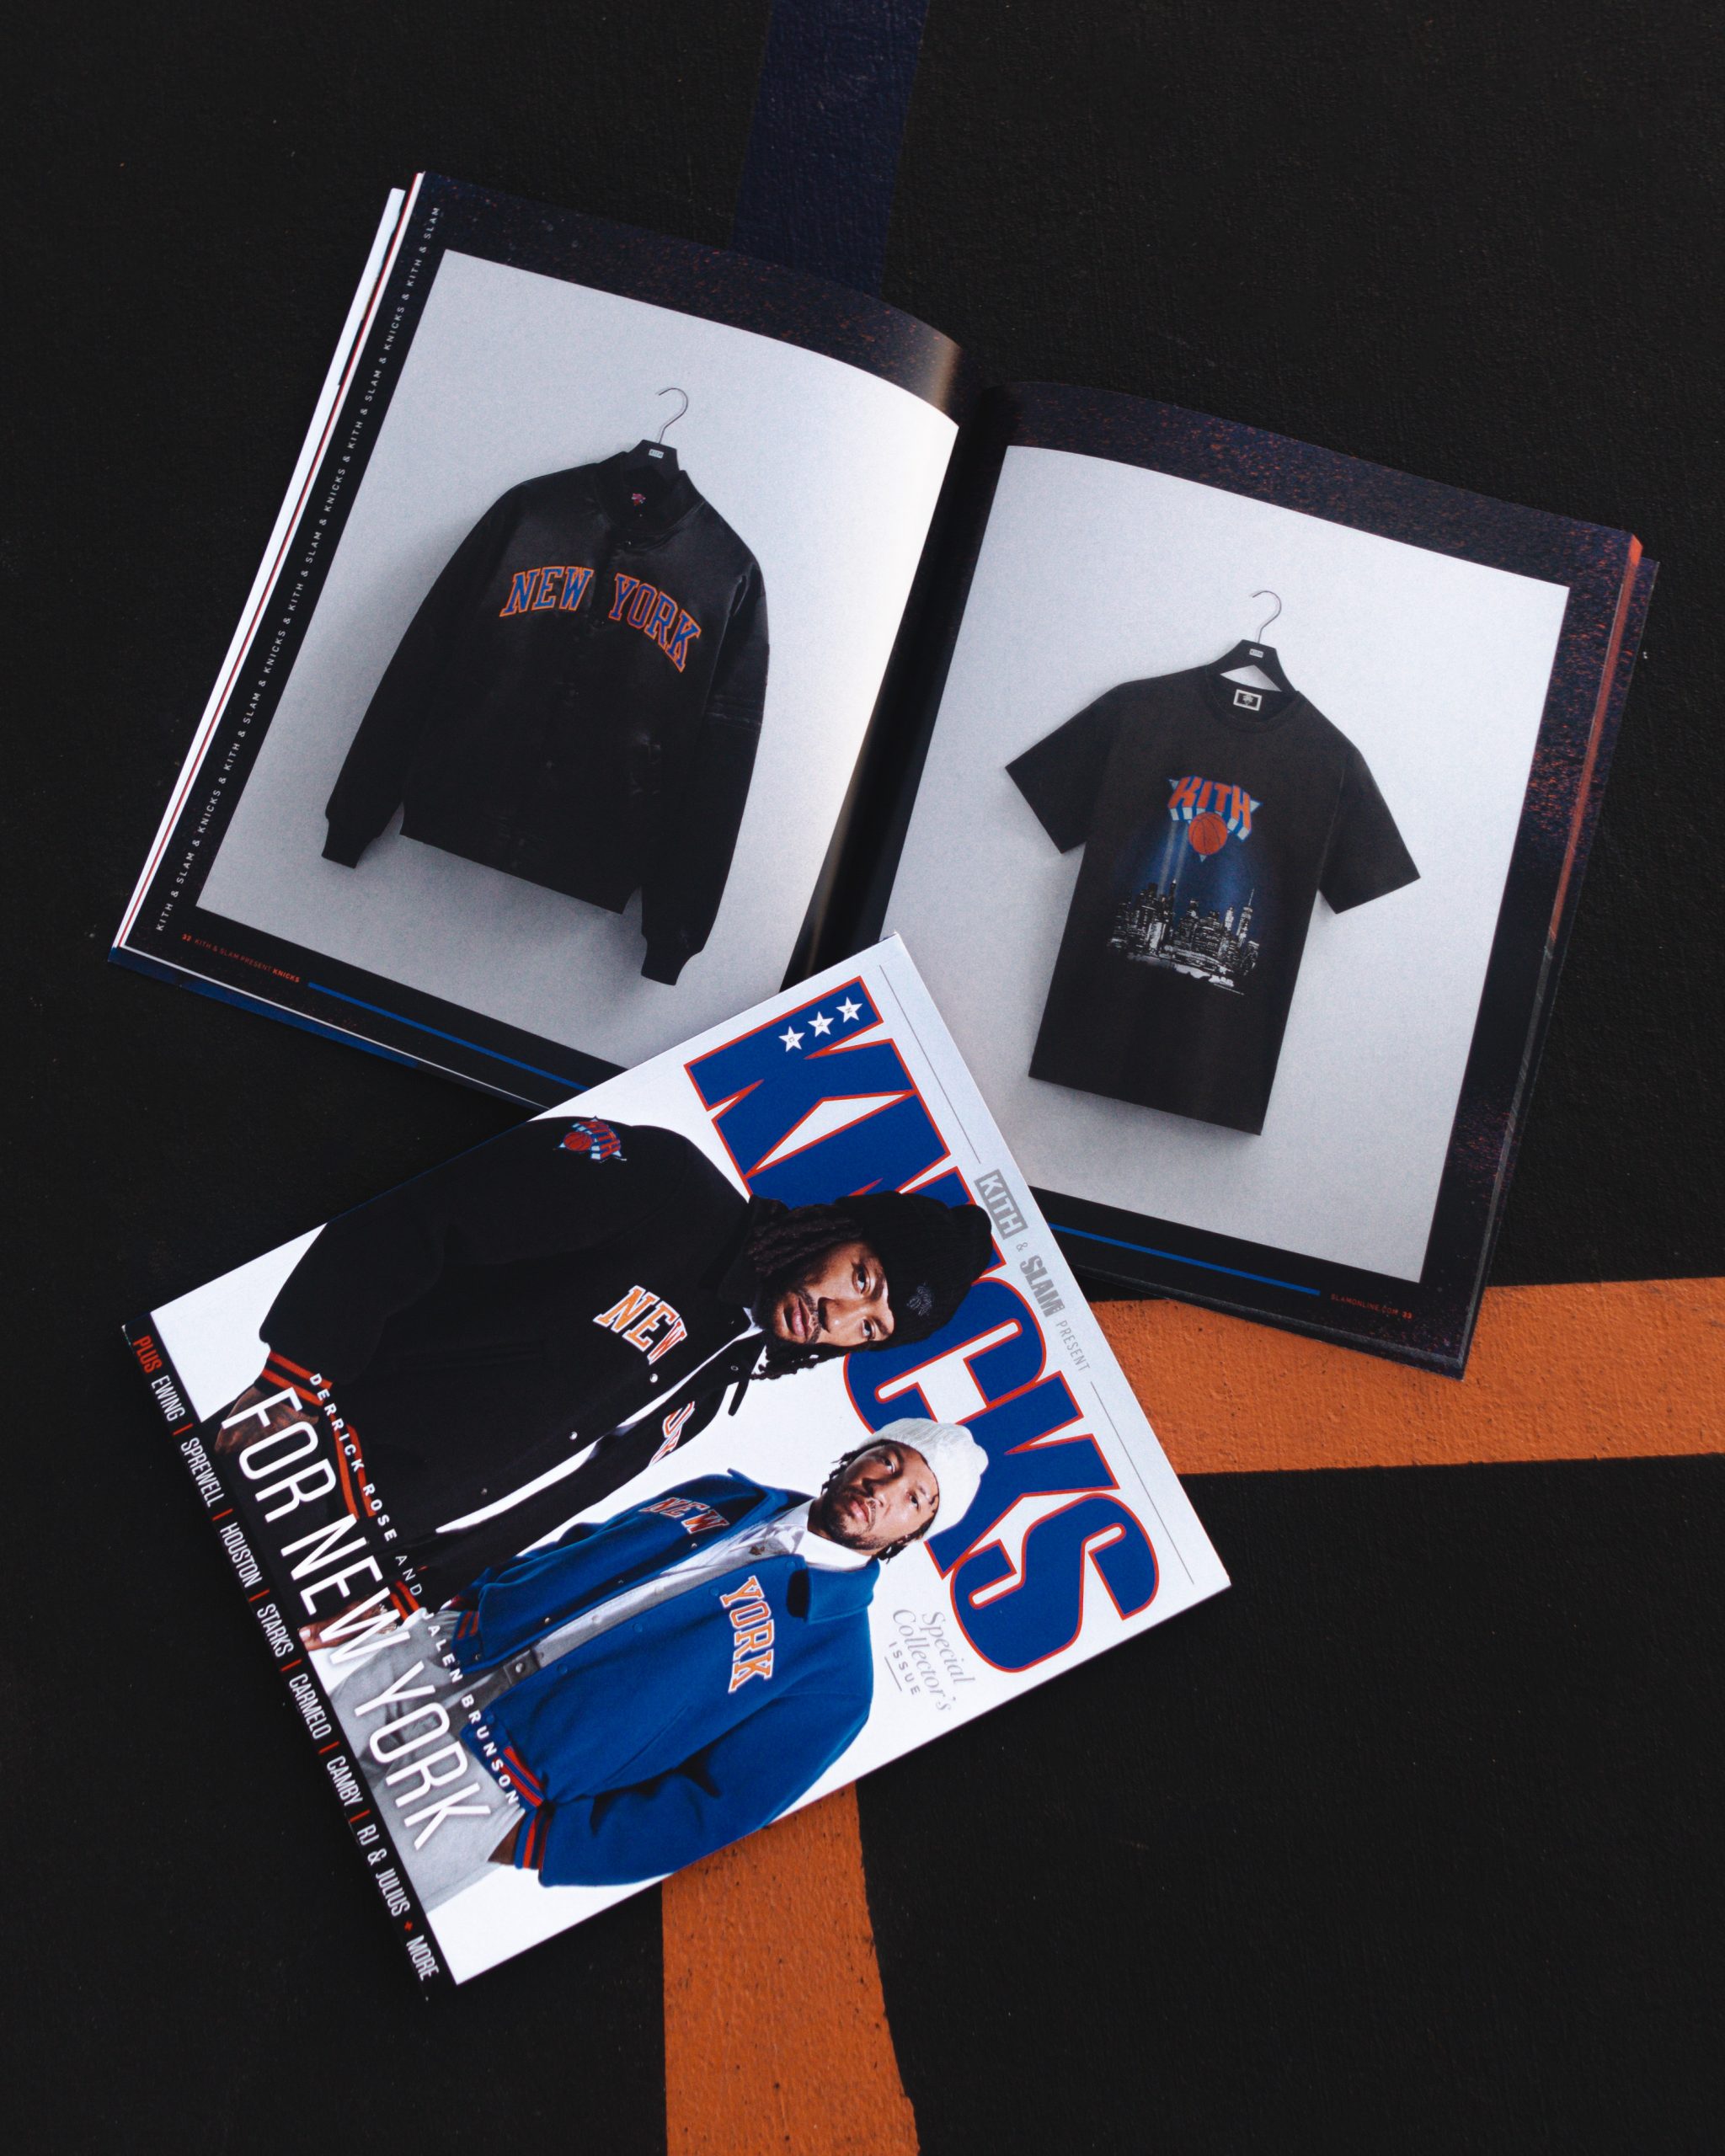 Kith & SLAM Present KNICKS is OUT NOW!